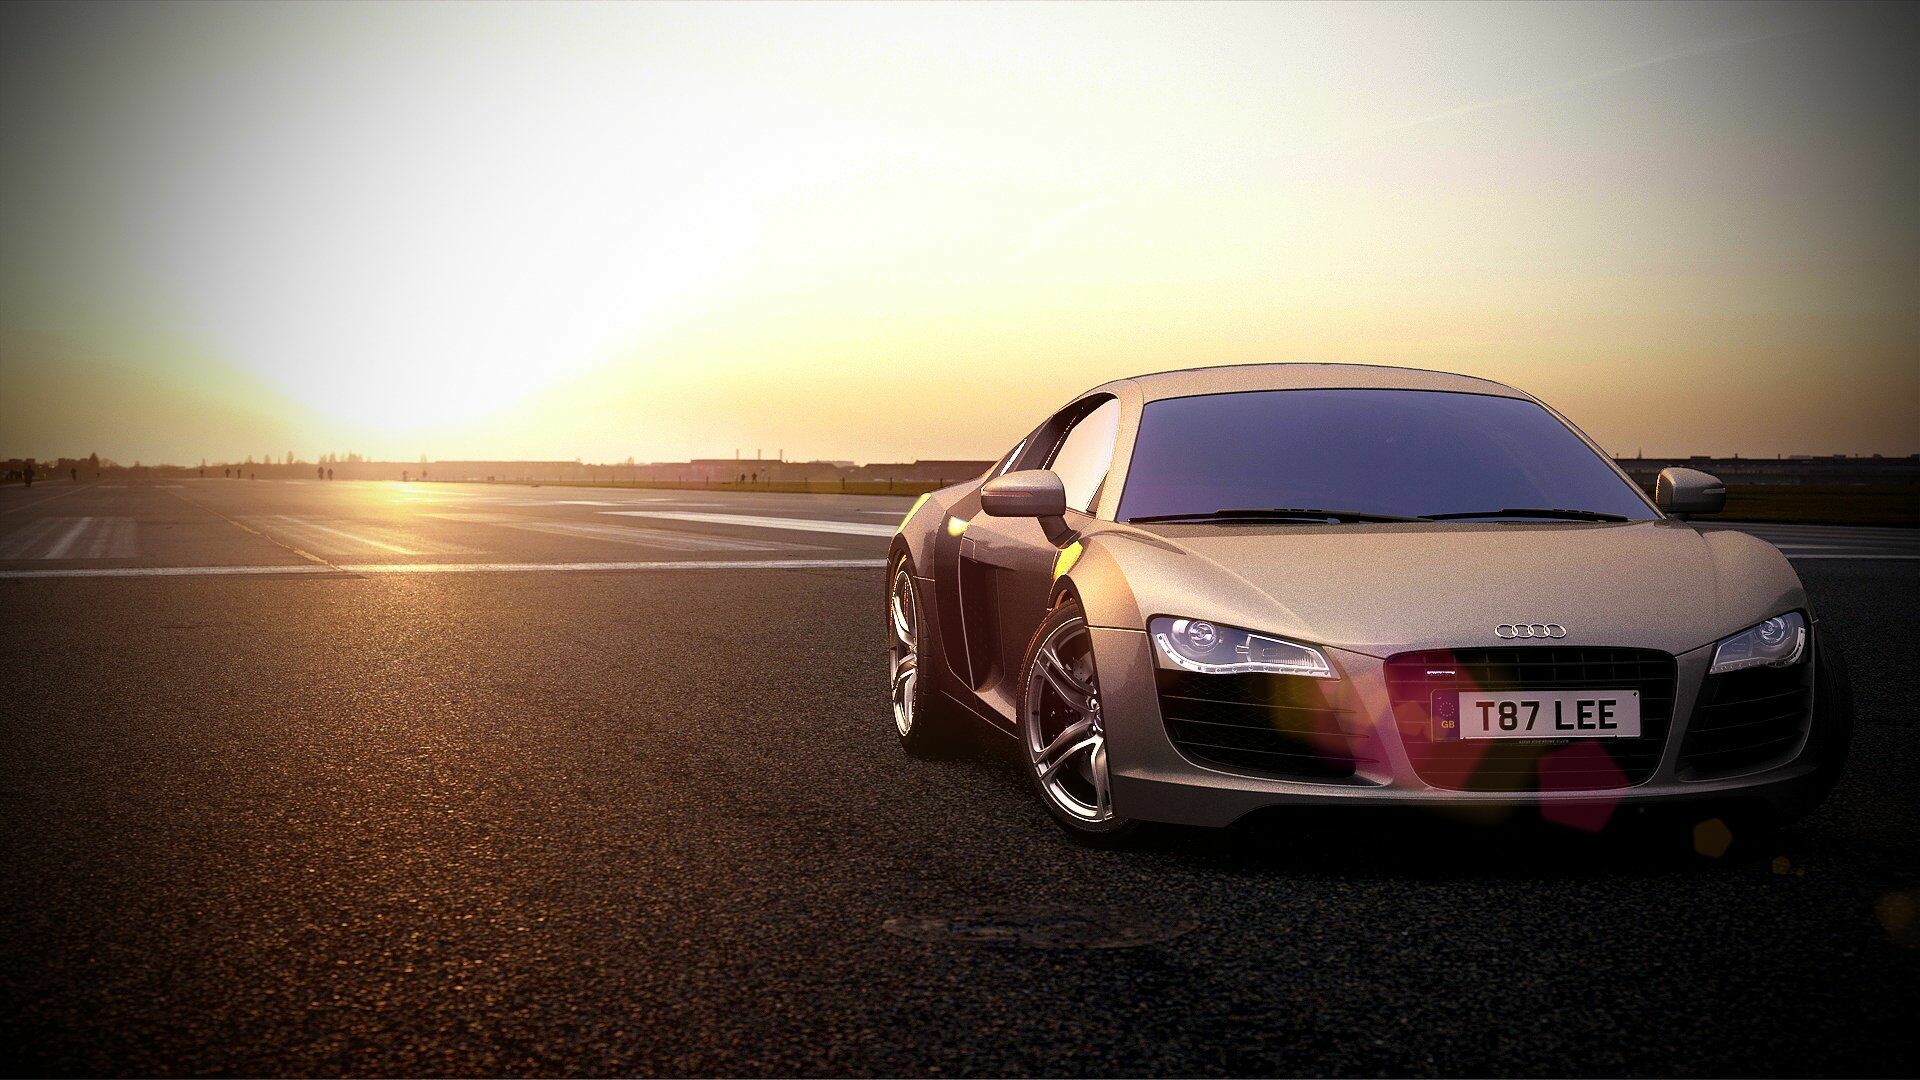 61+ Audi R8 Wallpapers: HD, 4K, 5K for PC and Mobile | Download free images  for iPhone, Android